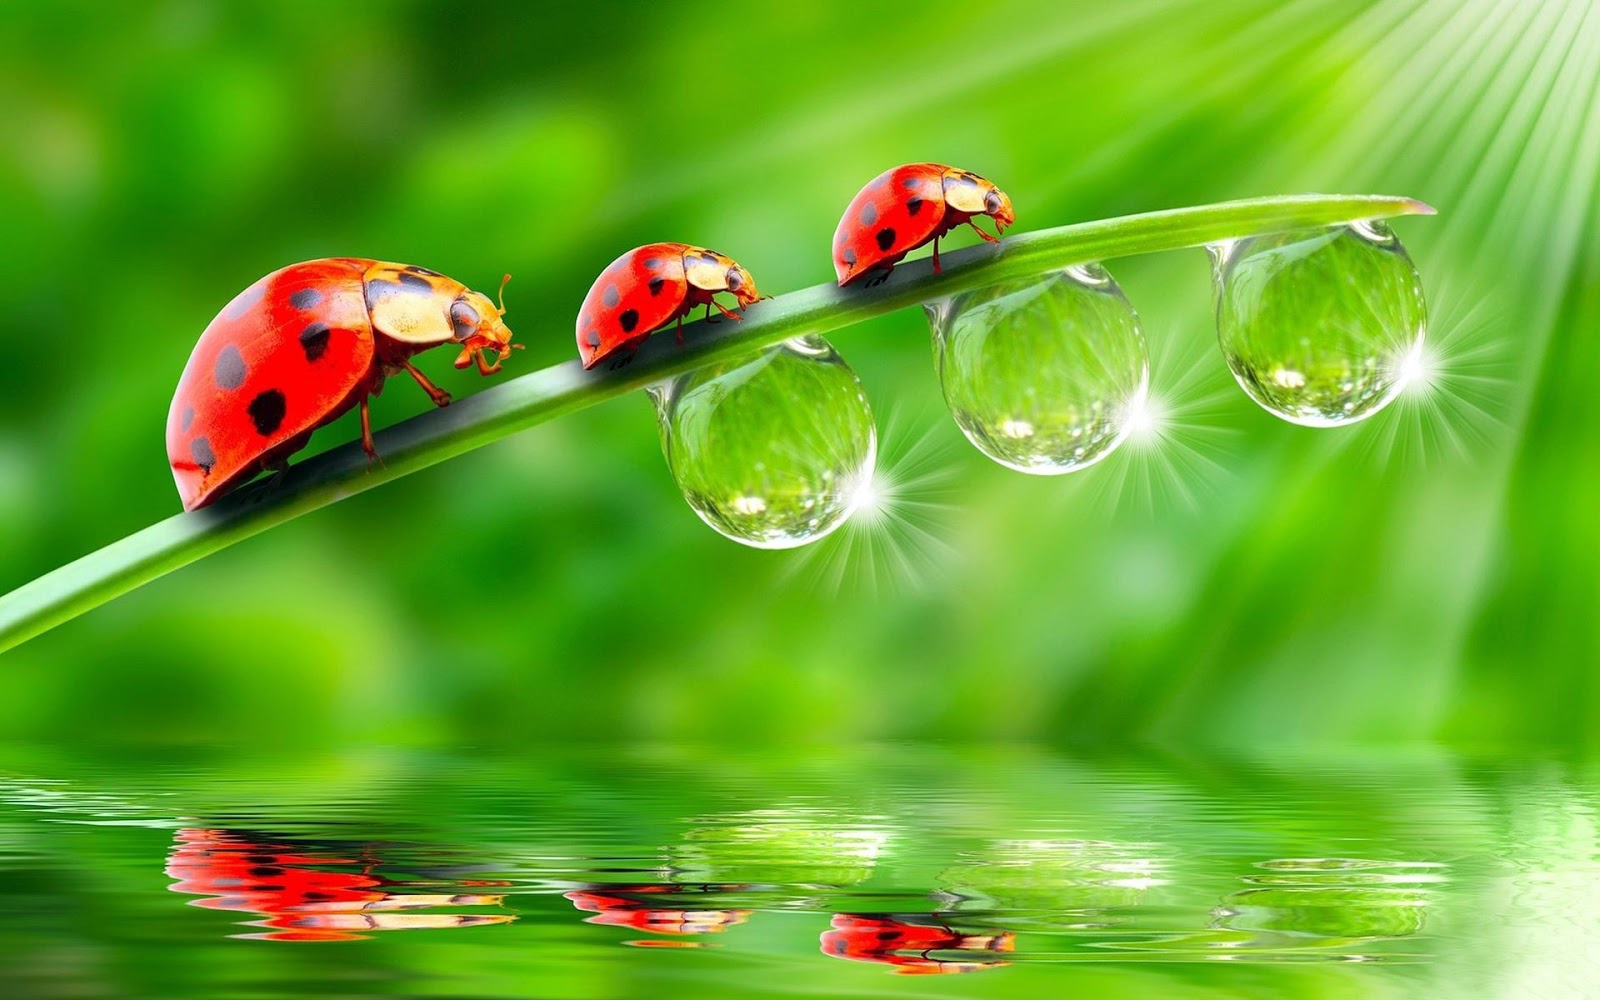 The Your Web: Water Drop Wallpaper - Water Wallpaper Hd - Live ...